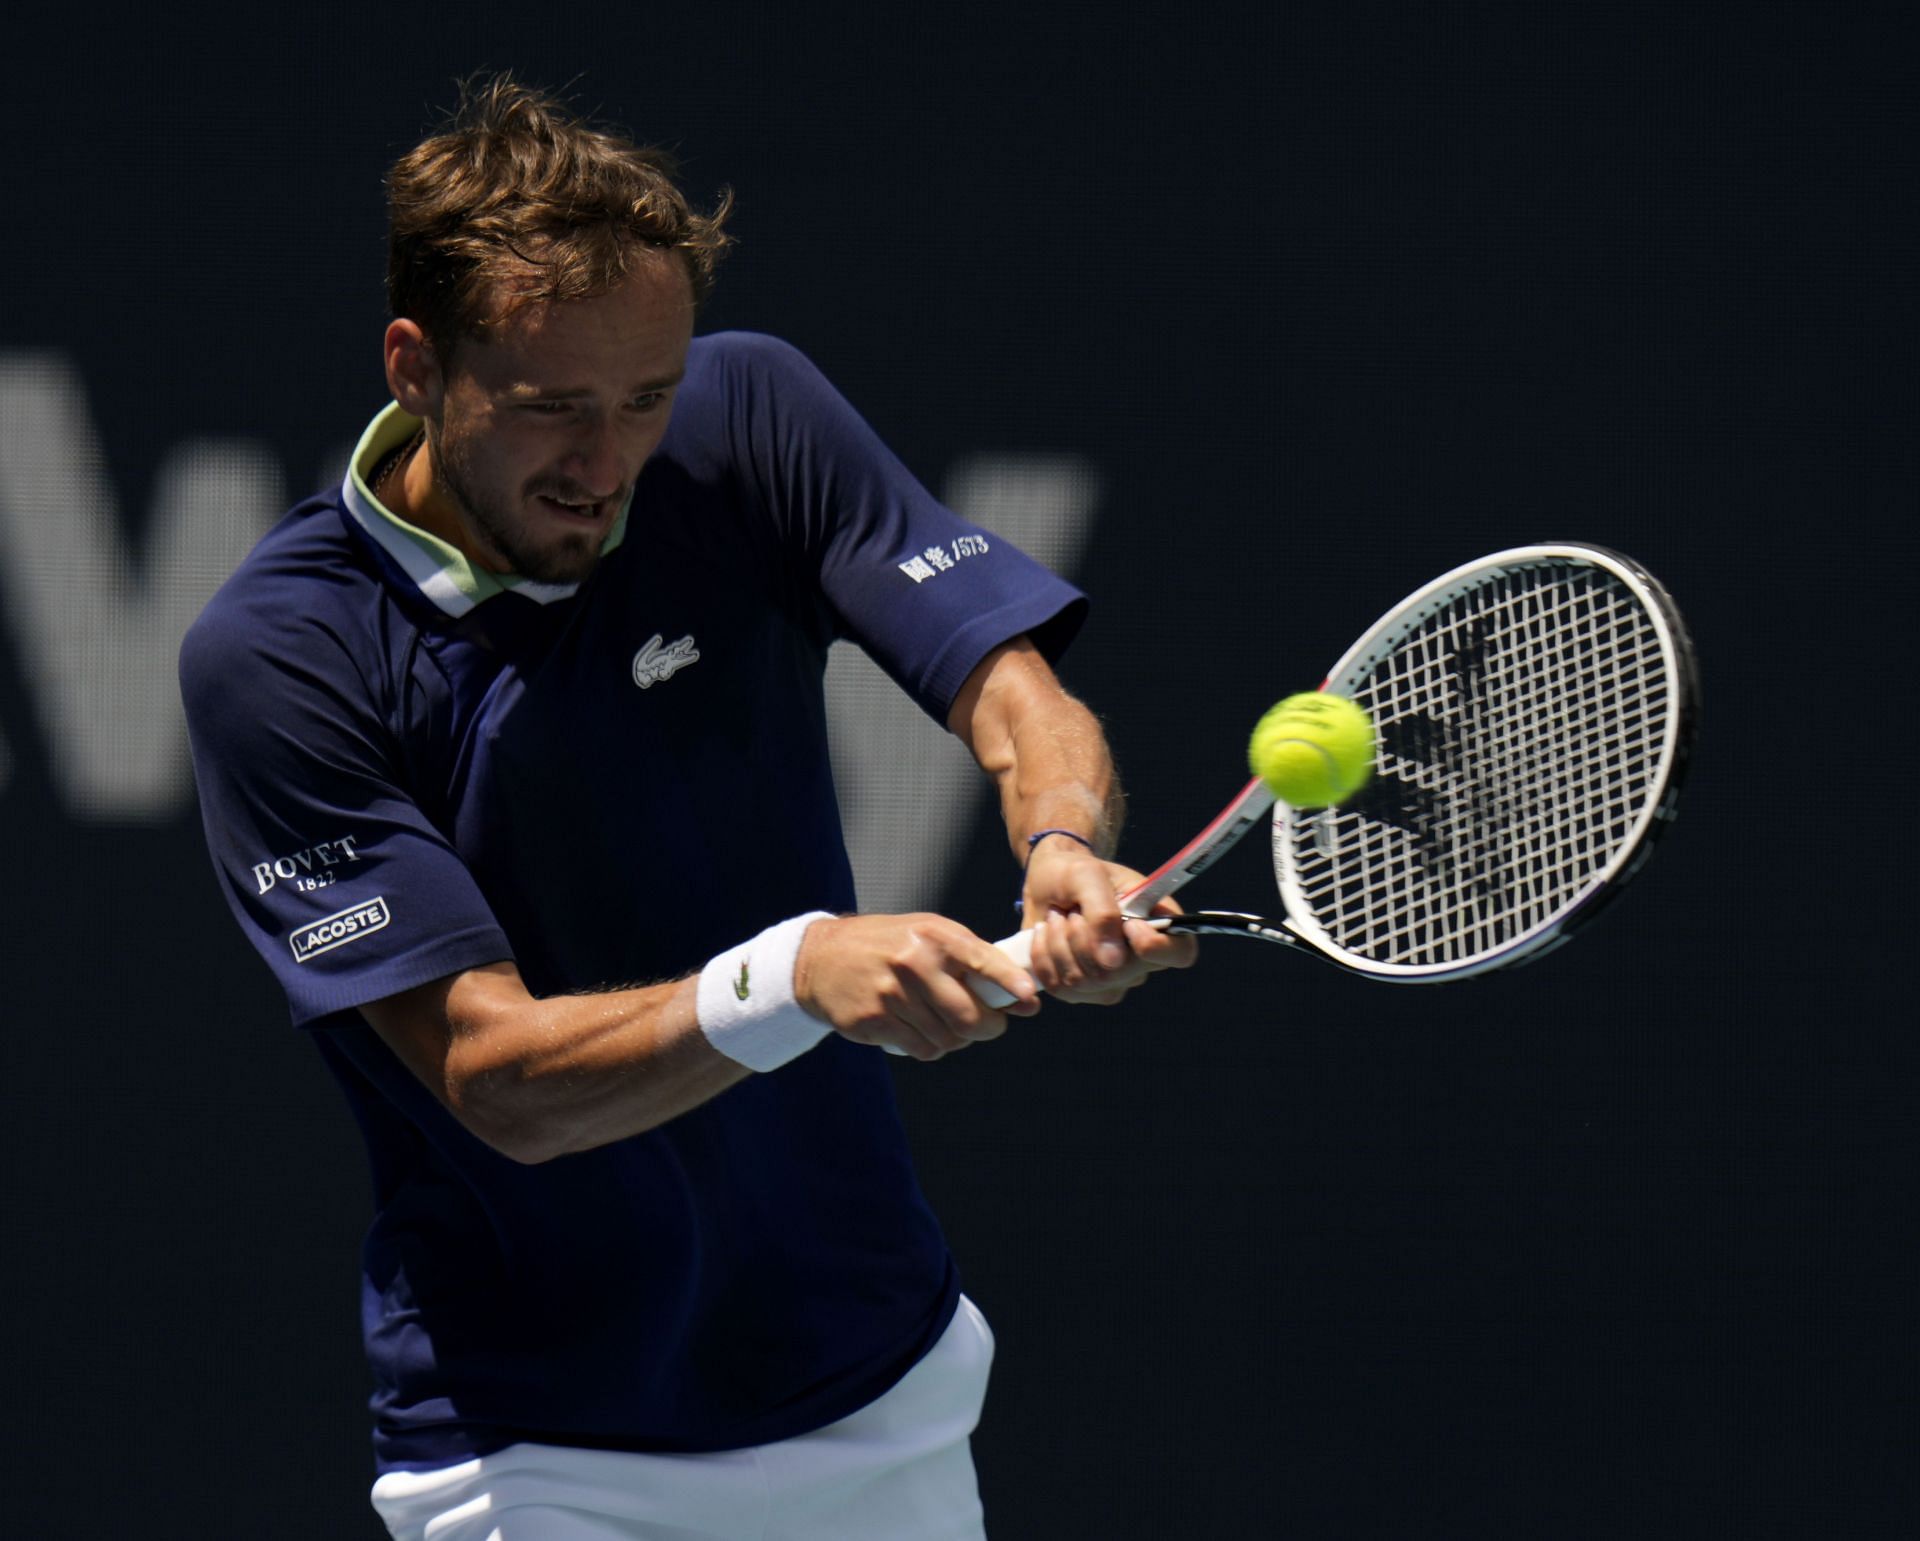 Daniil Medvedev has won both his matches in Miami in straight sets